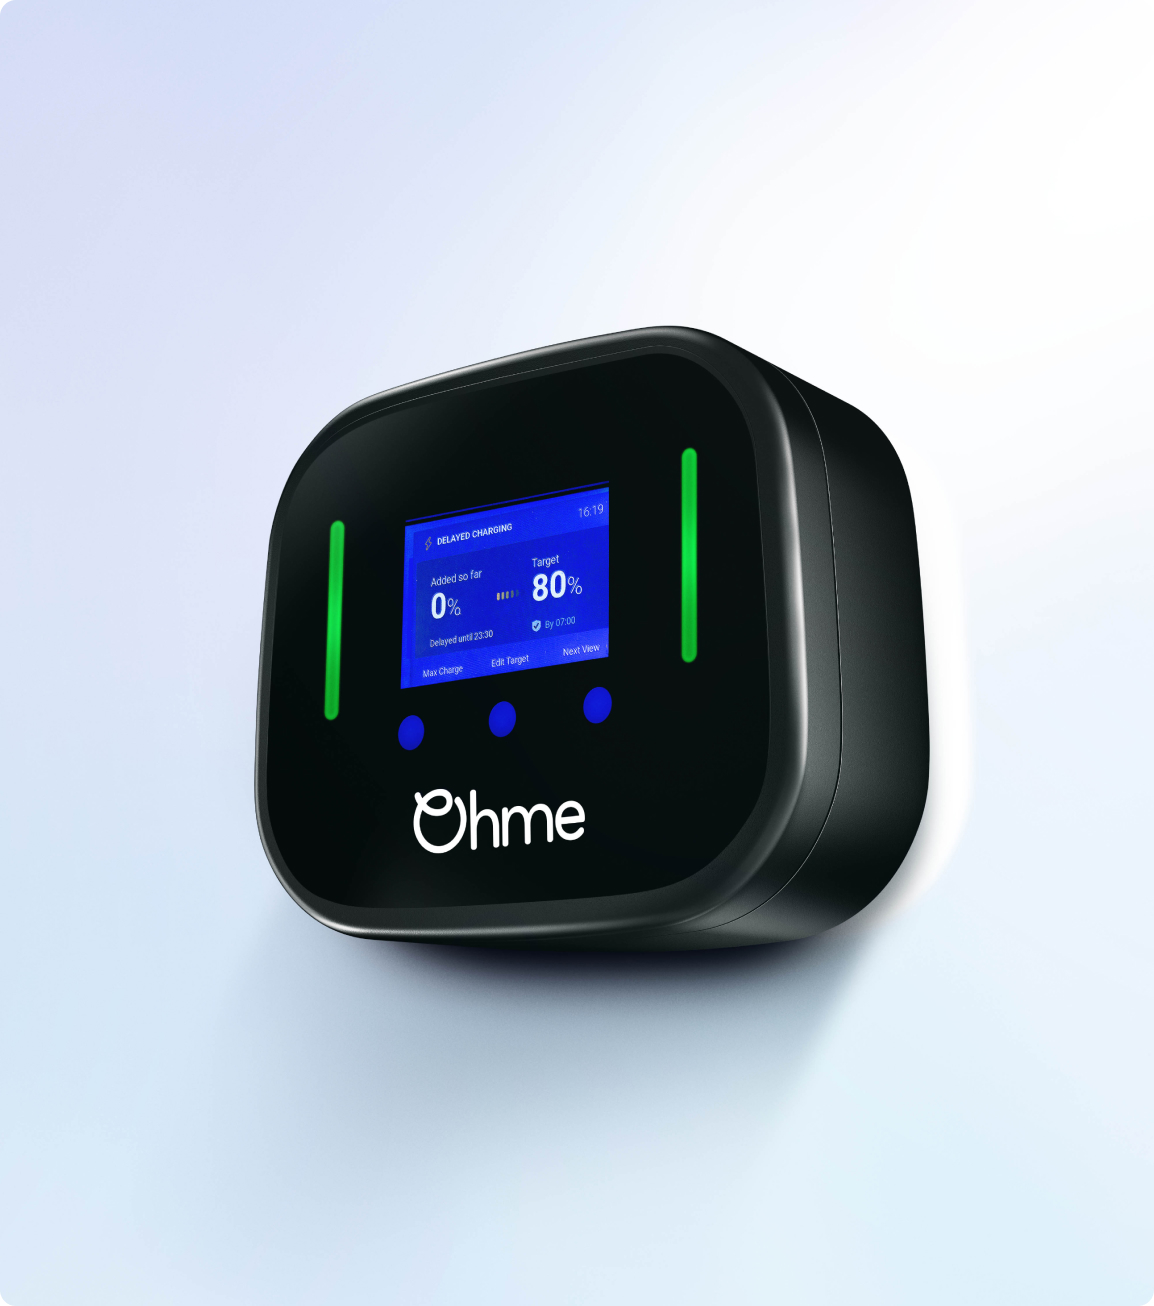 Image of an Ohme Home Pro on a light background